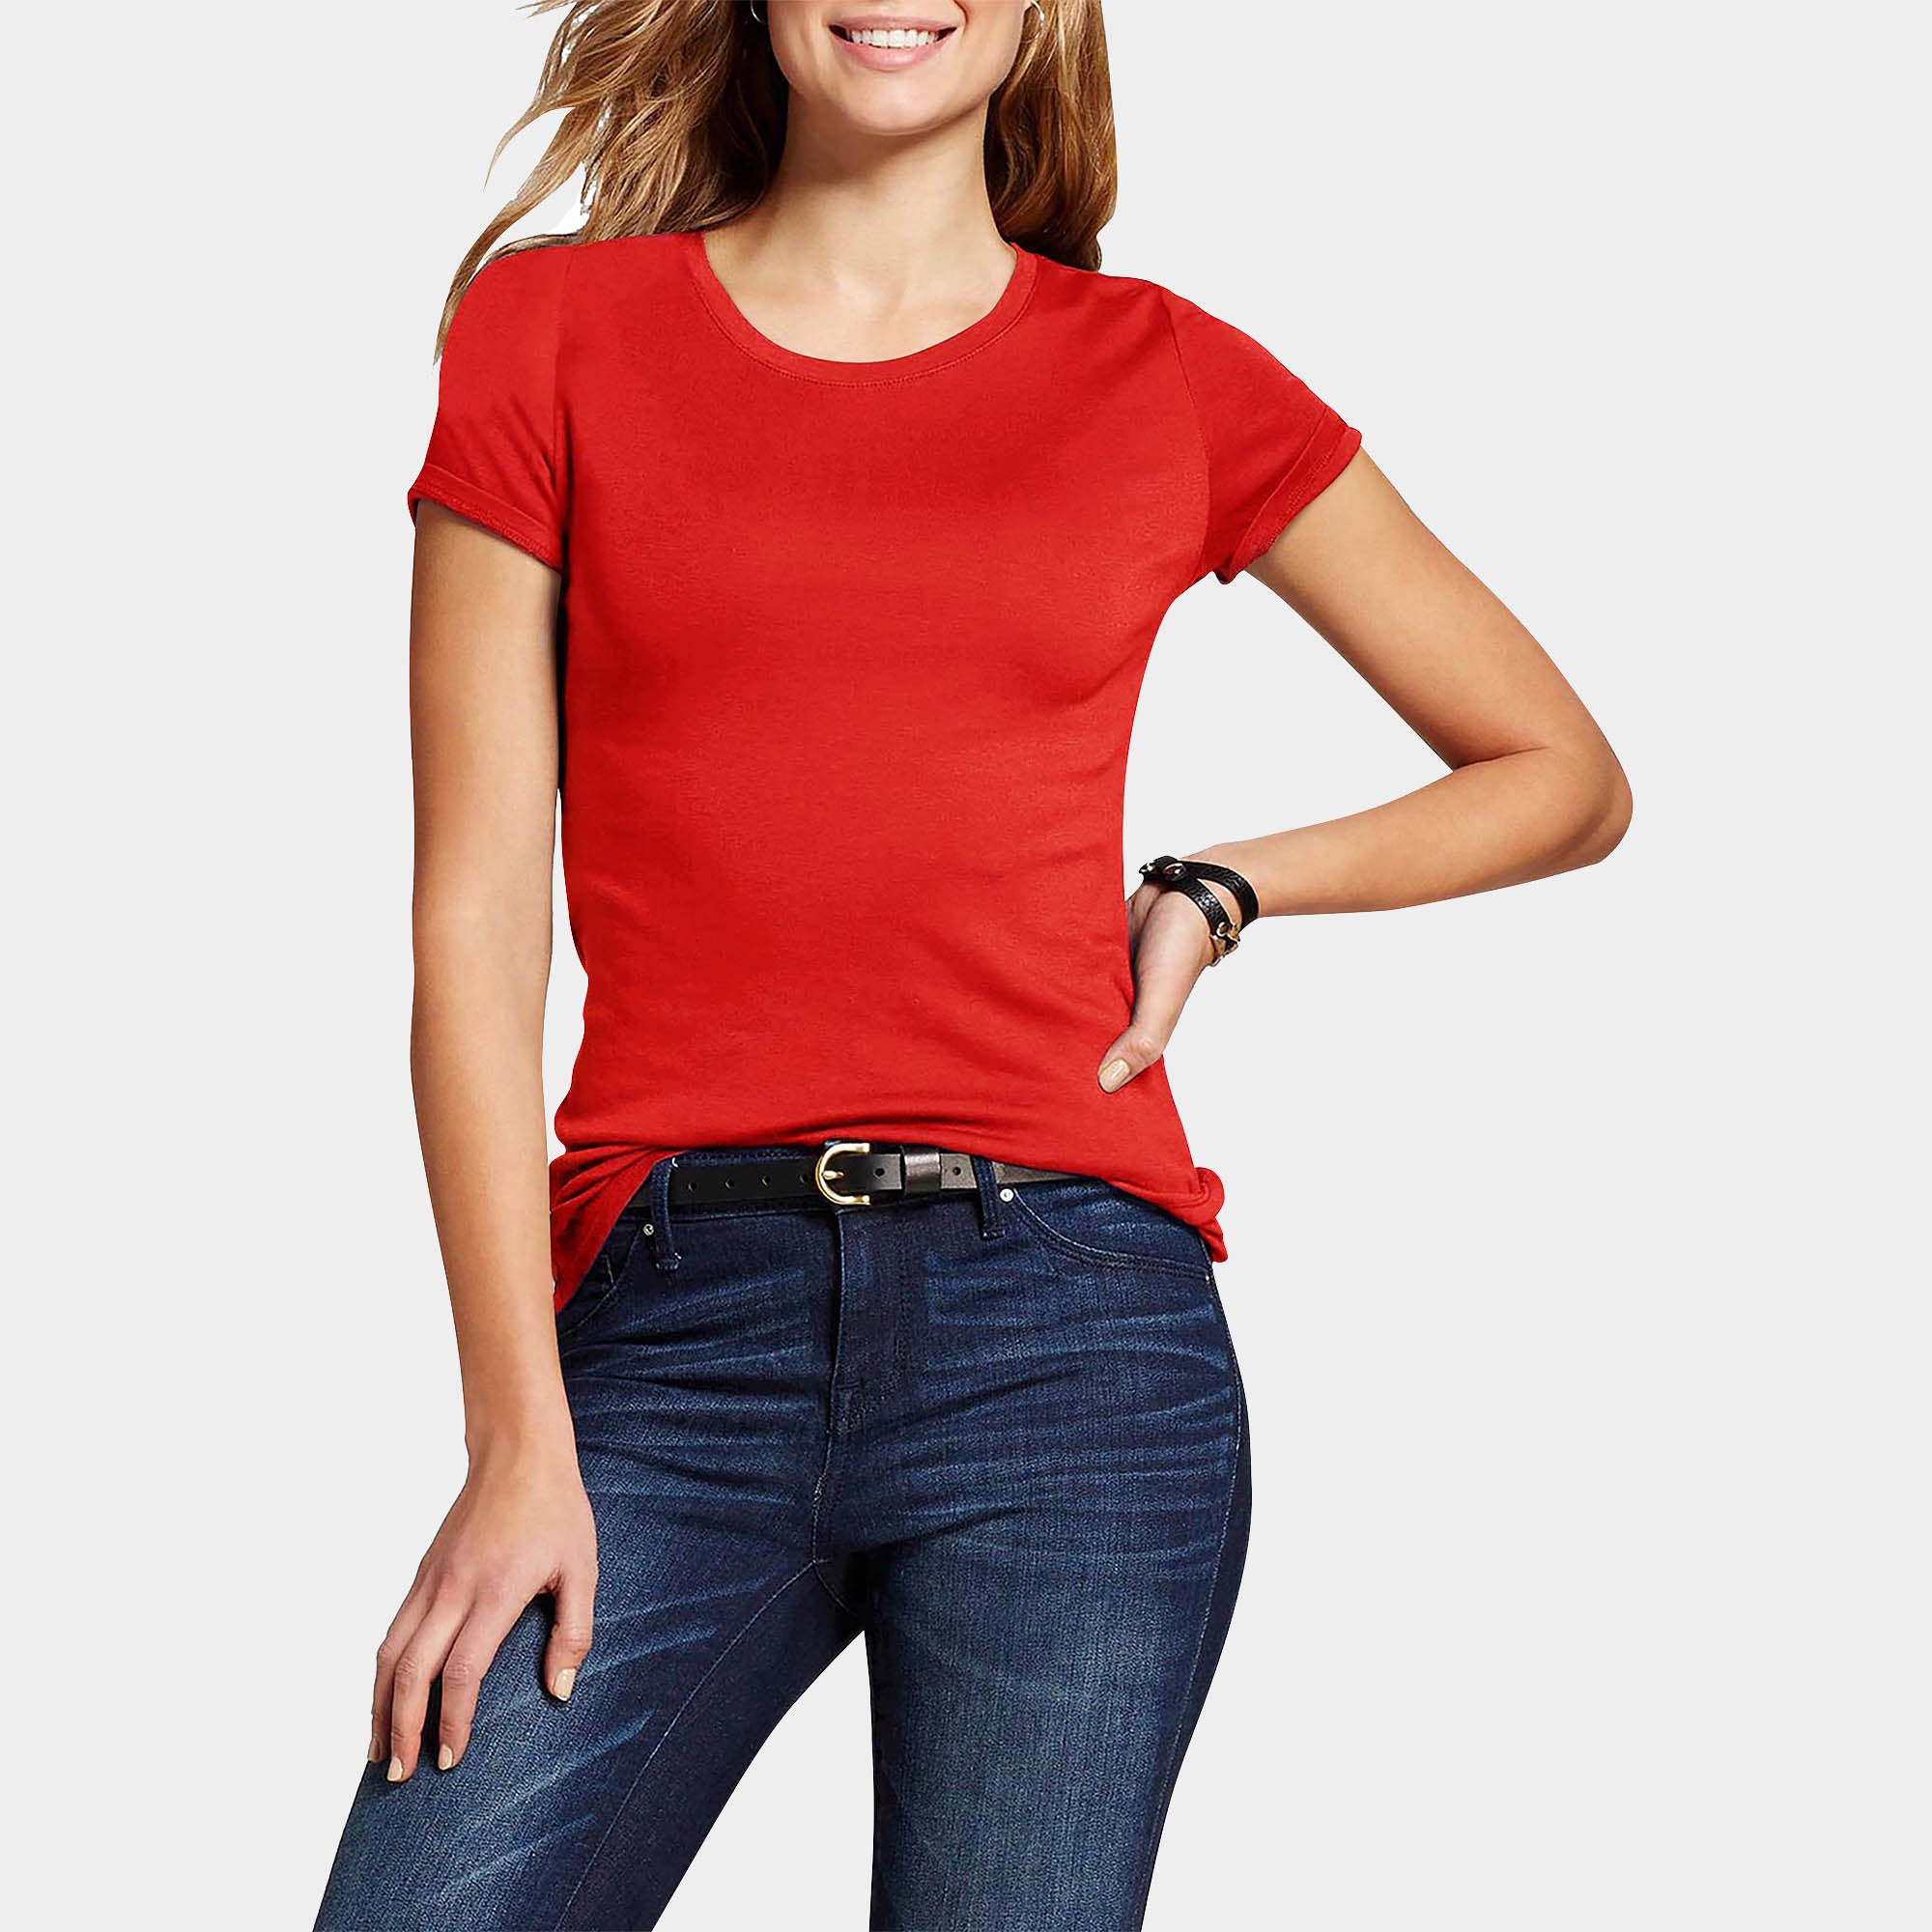 comfort tee_comfort color tees_comfort colors tee shirts_womens tee_tee shirts for women_best quality t shirts for women_Red